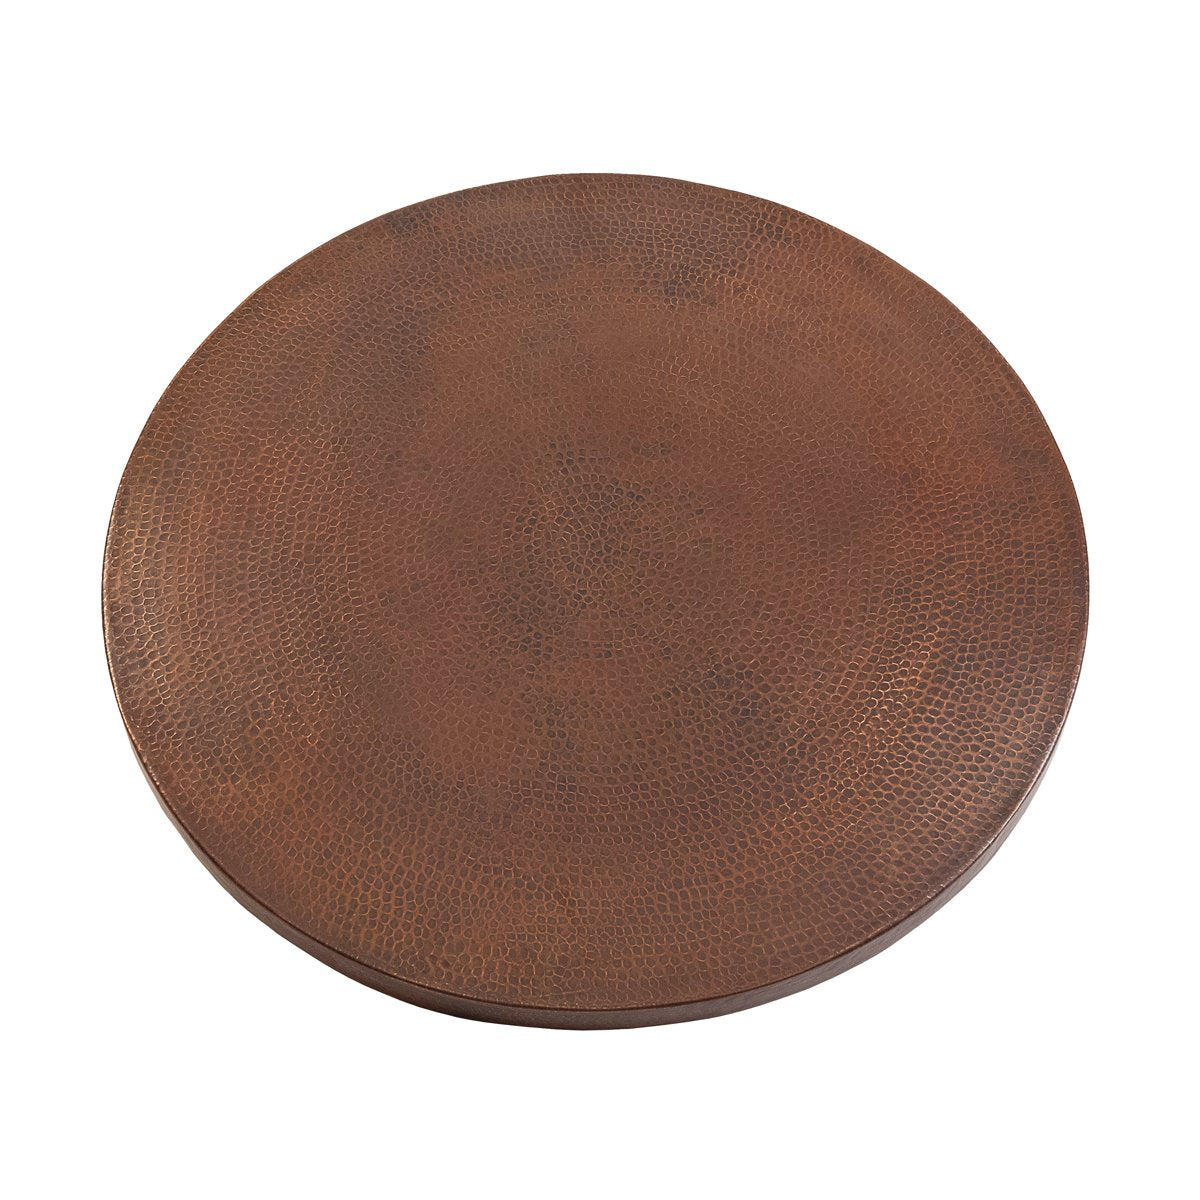 Premier Copper Products Round Hammered Copper Table Top